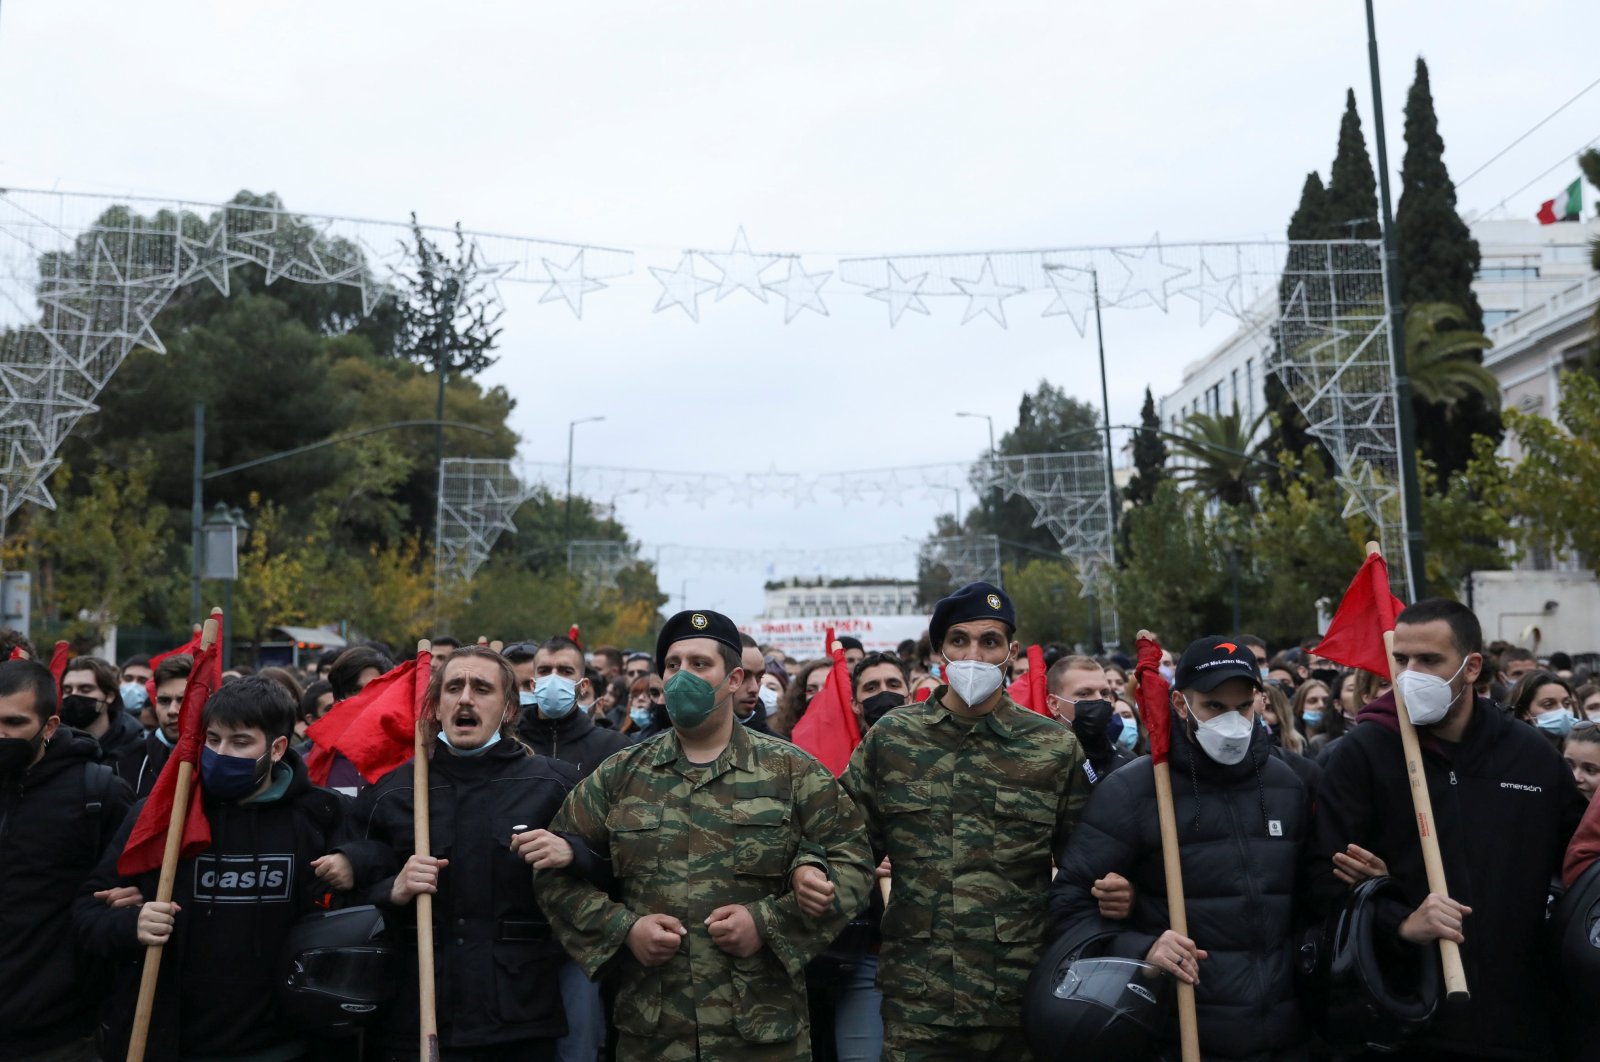 People dressed as soldiers march towards the U.S. Embassy during a rally marking the 48th anniversary of 1973 Athens Polytechnic student uprising, in Athens, Greece, Nov. 17, 2021. (Reuters Photo)